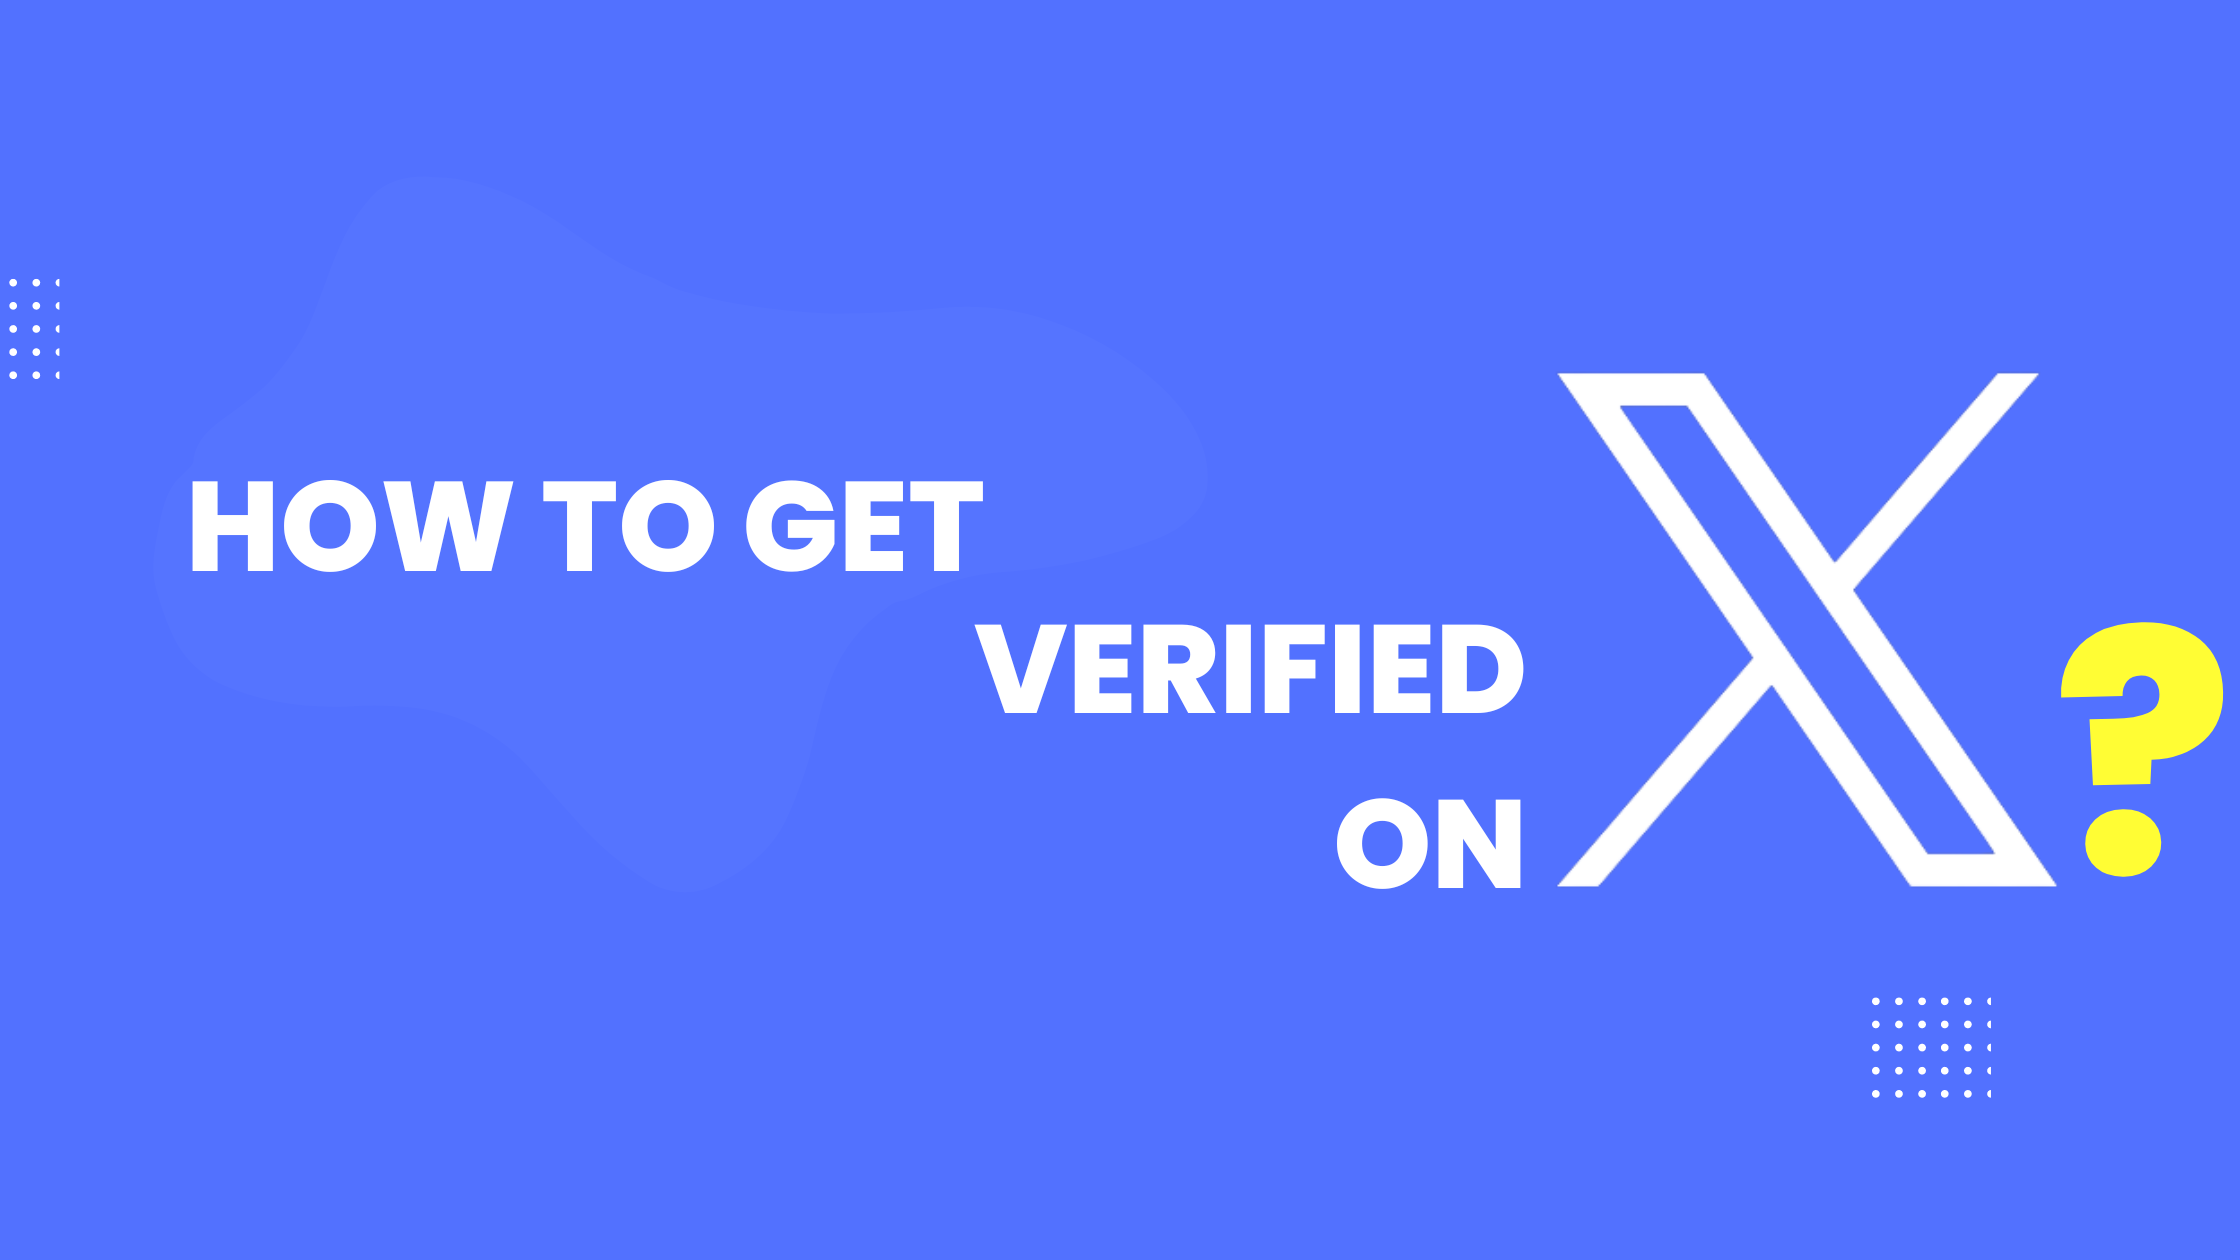 How to Verify your Twitter (X) Account